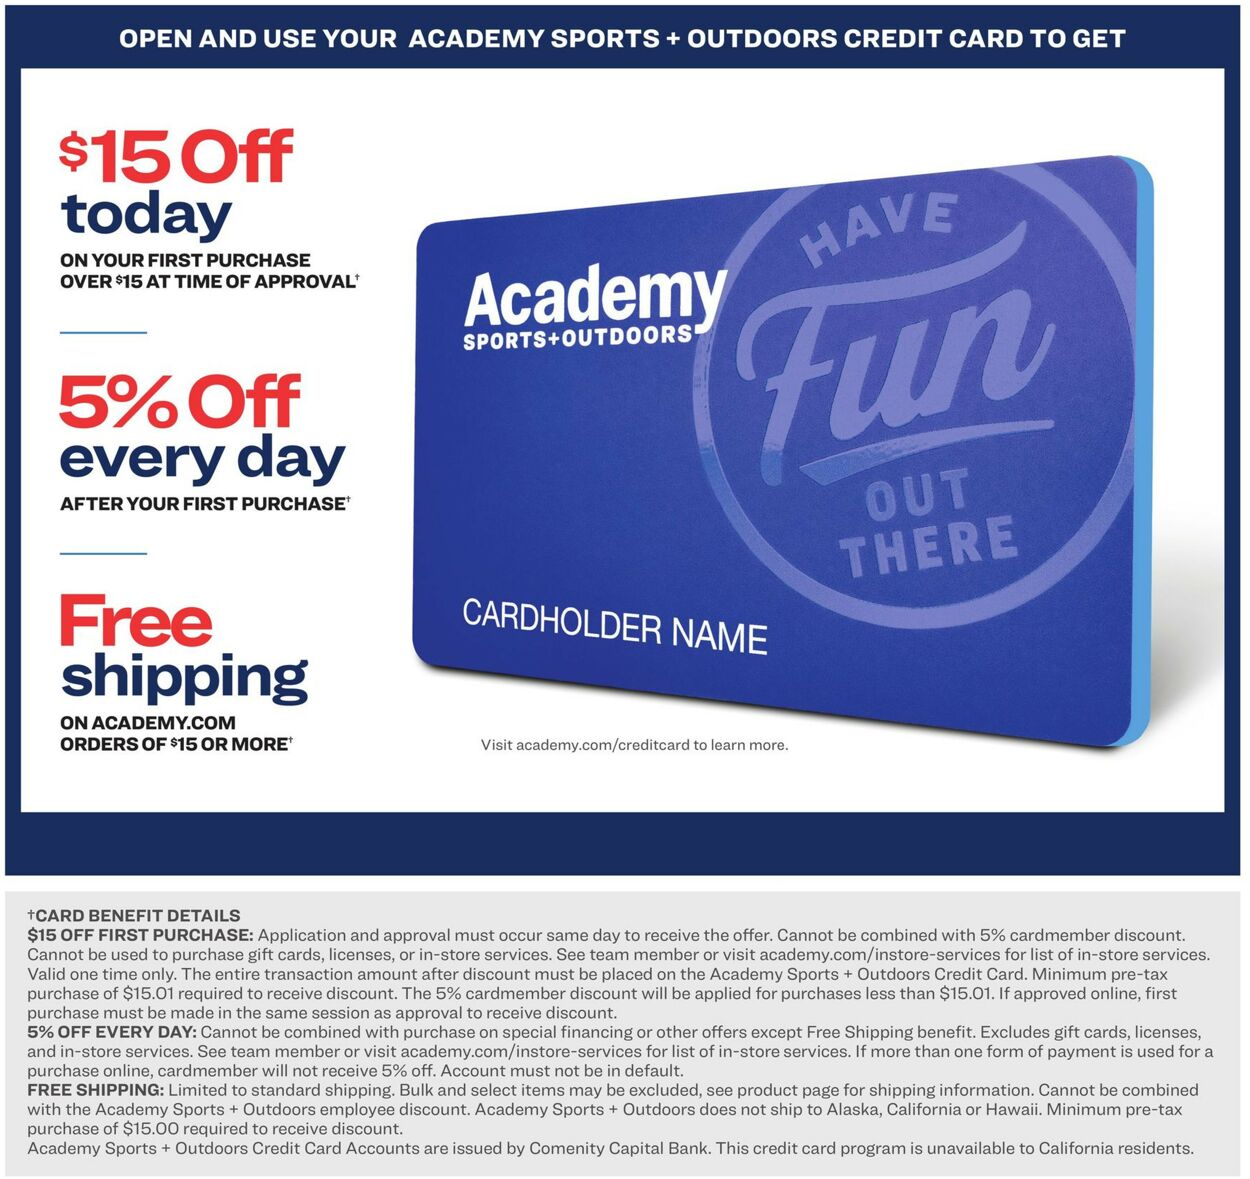 Academy Sports Ad from 10/31/2022